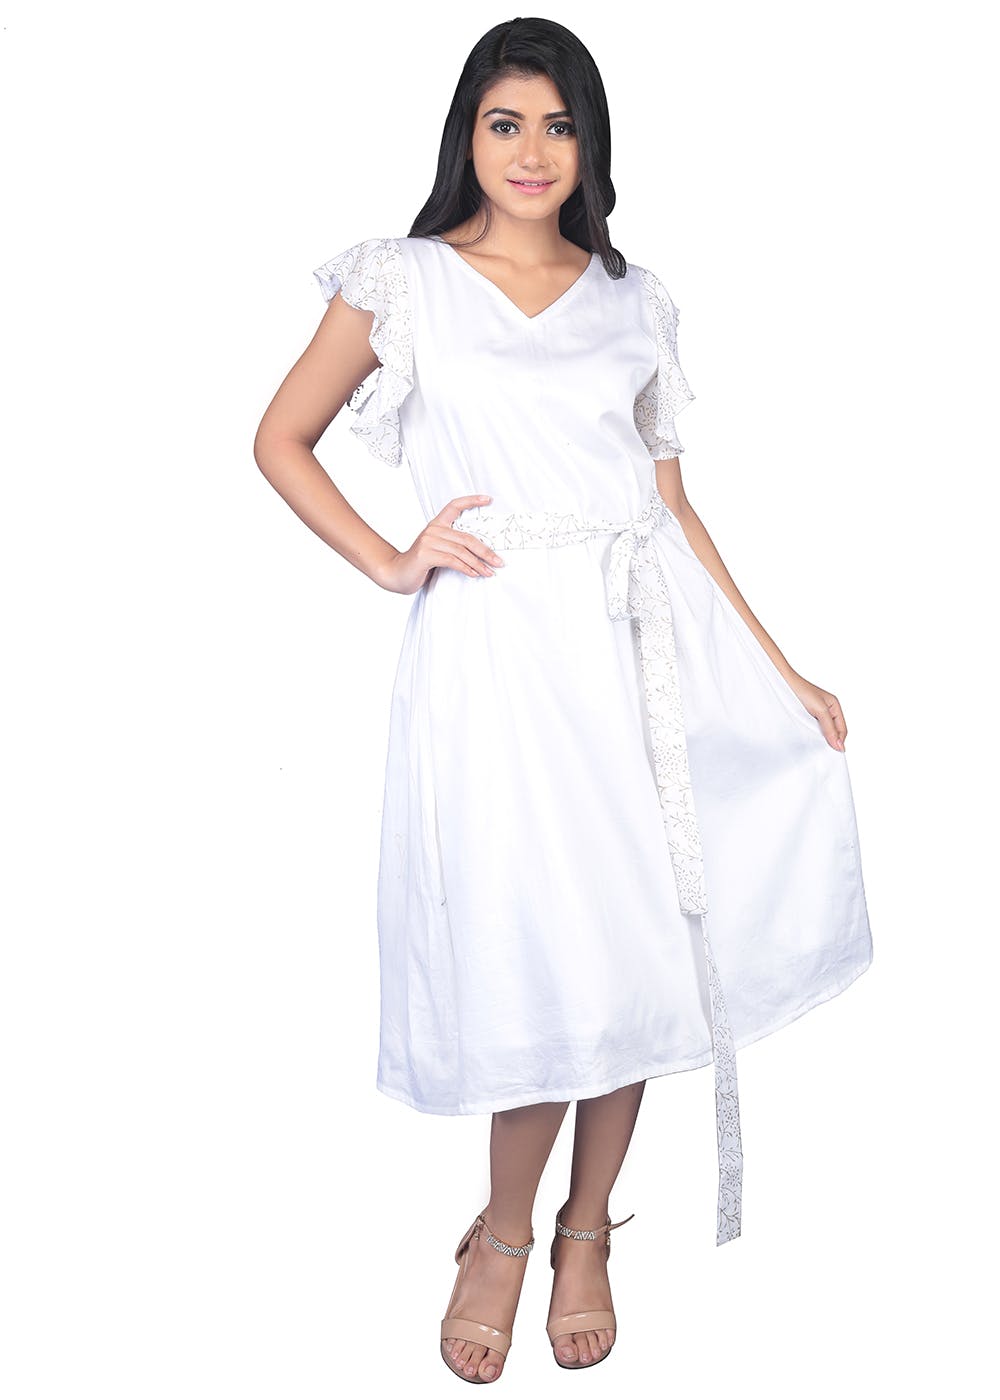 Ruffled Sleeve Detail White A-Line Dress With Belt